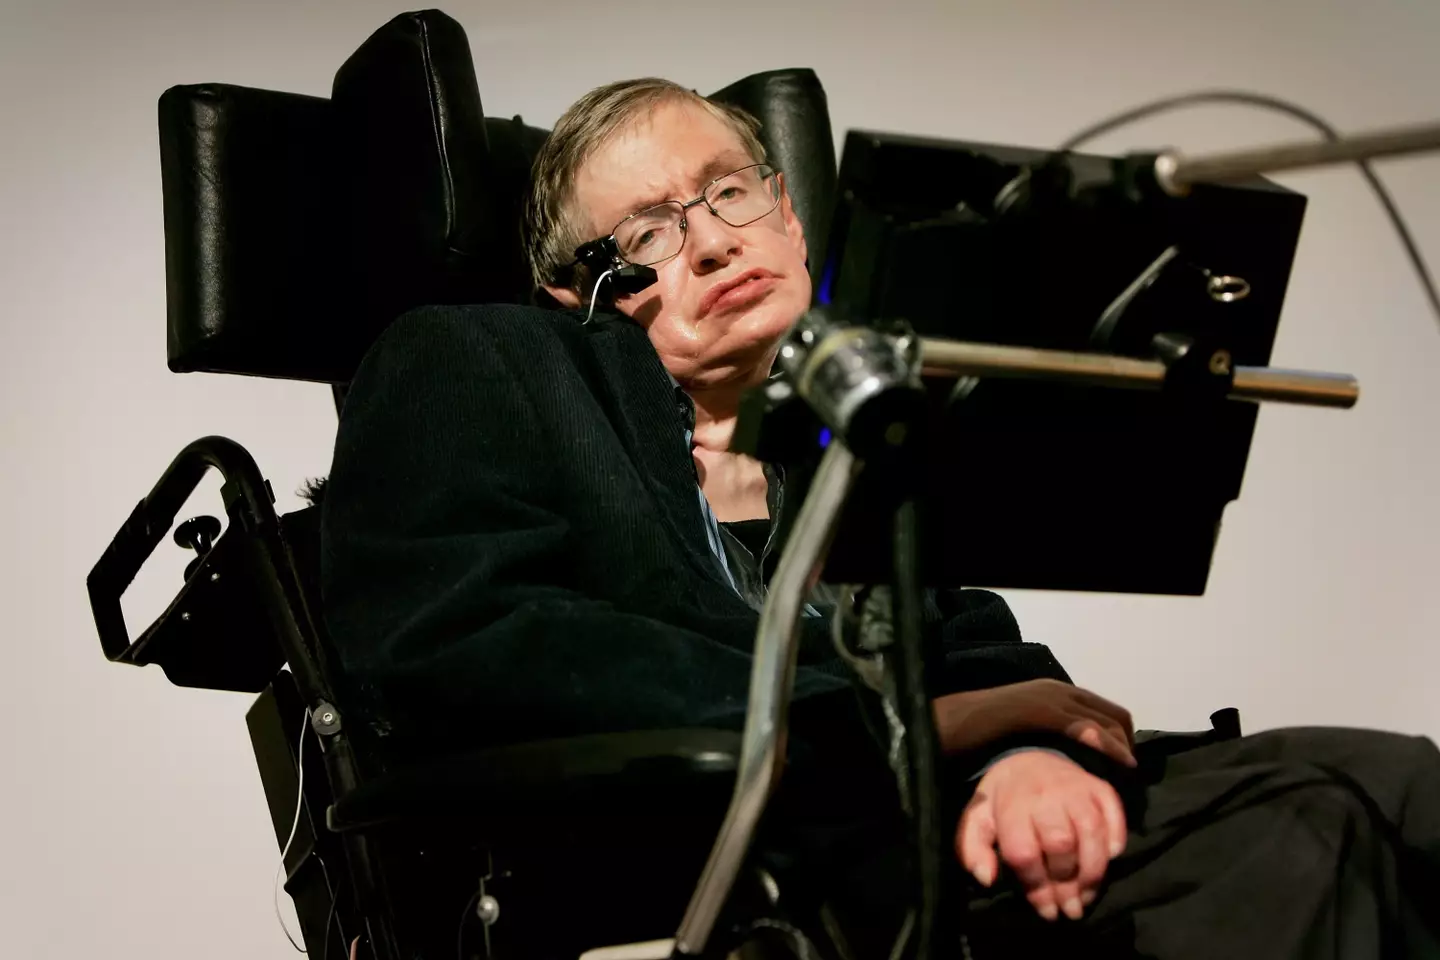 Stephen Hawking was one of over 170 people named in the recently released Epstein documents.